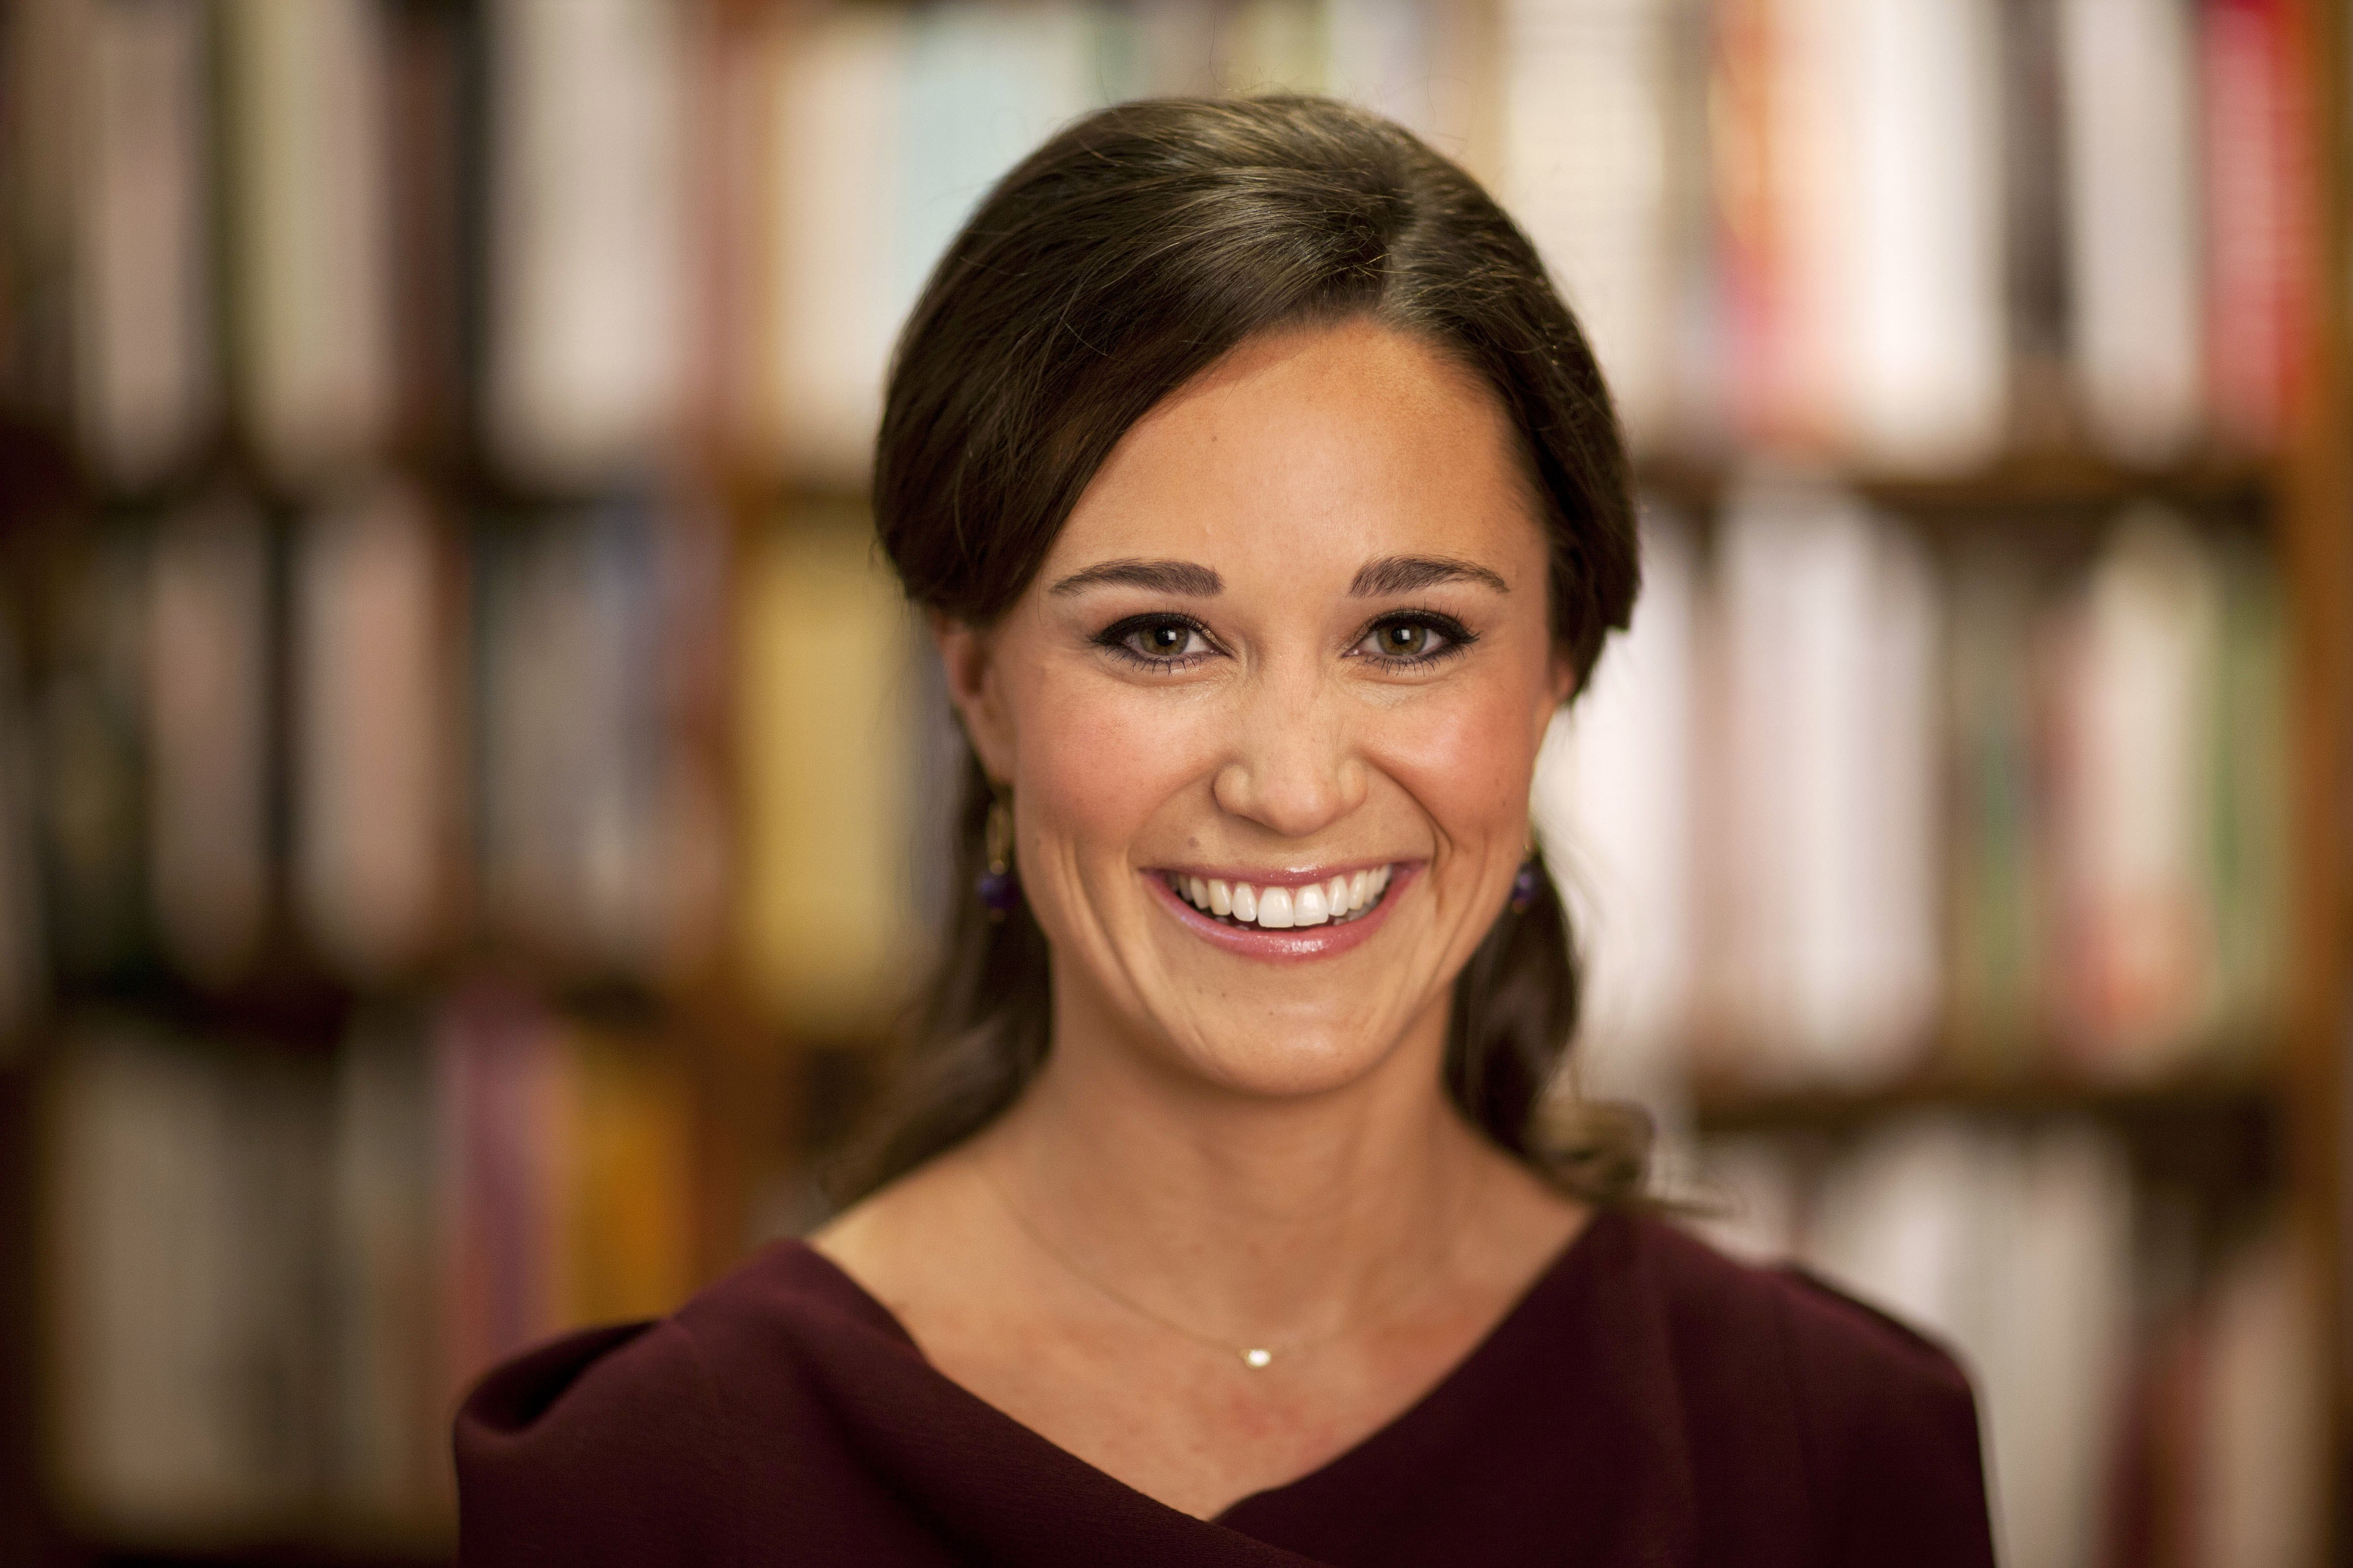  Pippa Middleton launches her new creative entertaining book 'Celebrate' on October 25, 2012 in London. | Source: Getty Images